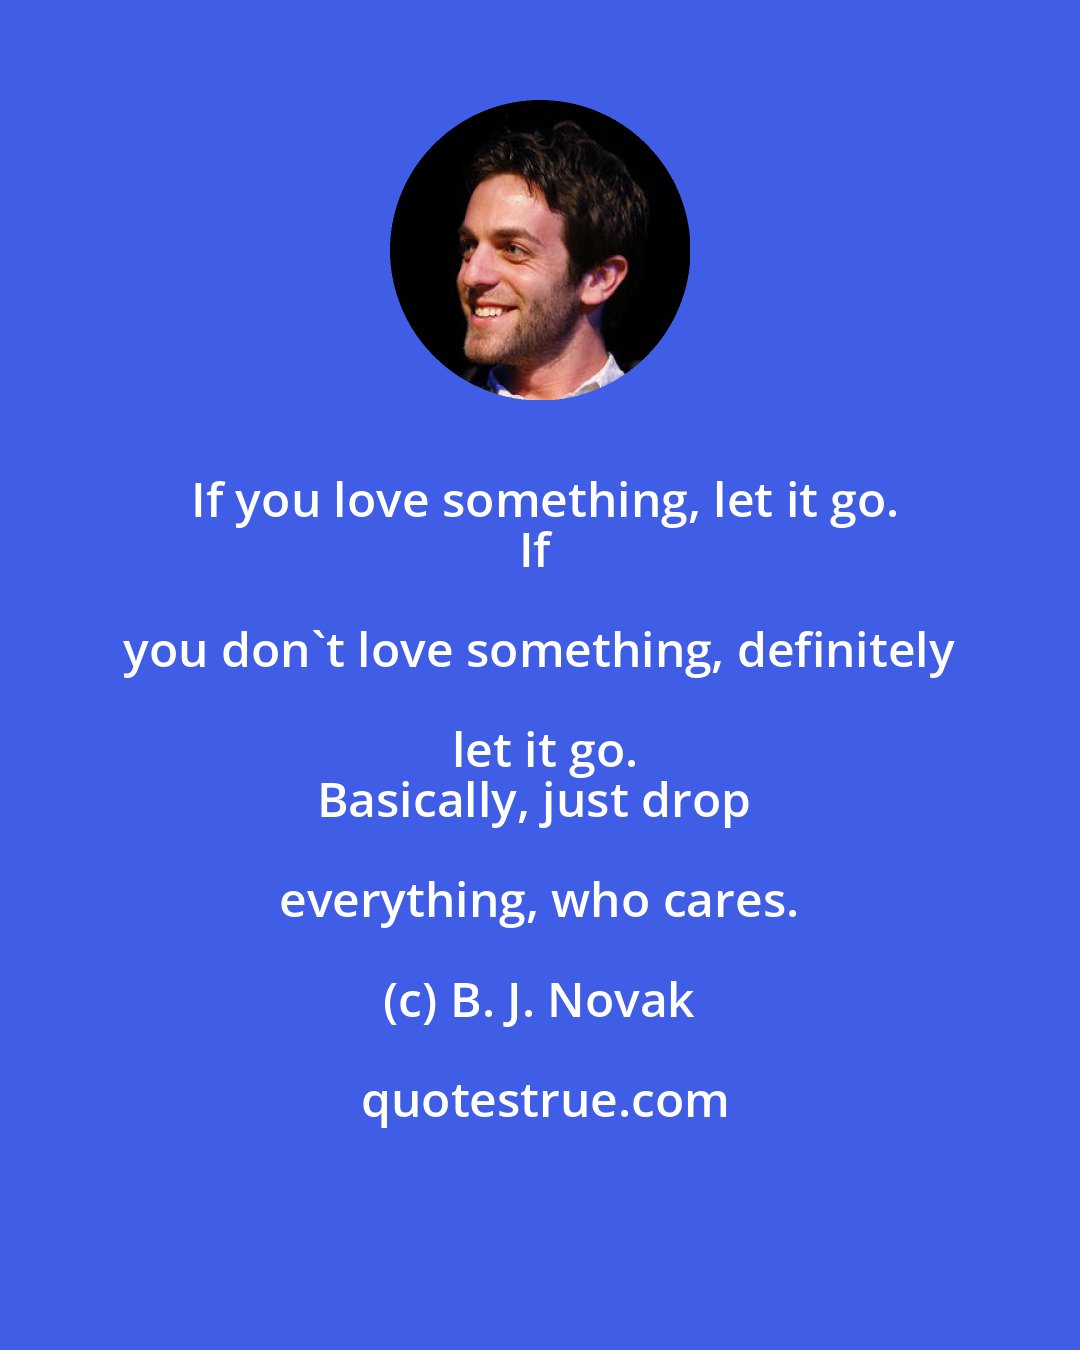 B. J. Novak: If you love something, let it go.
If you don't love something, definitely let it go.
Basically, just drop everything, who cares.